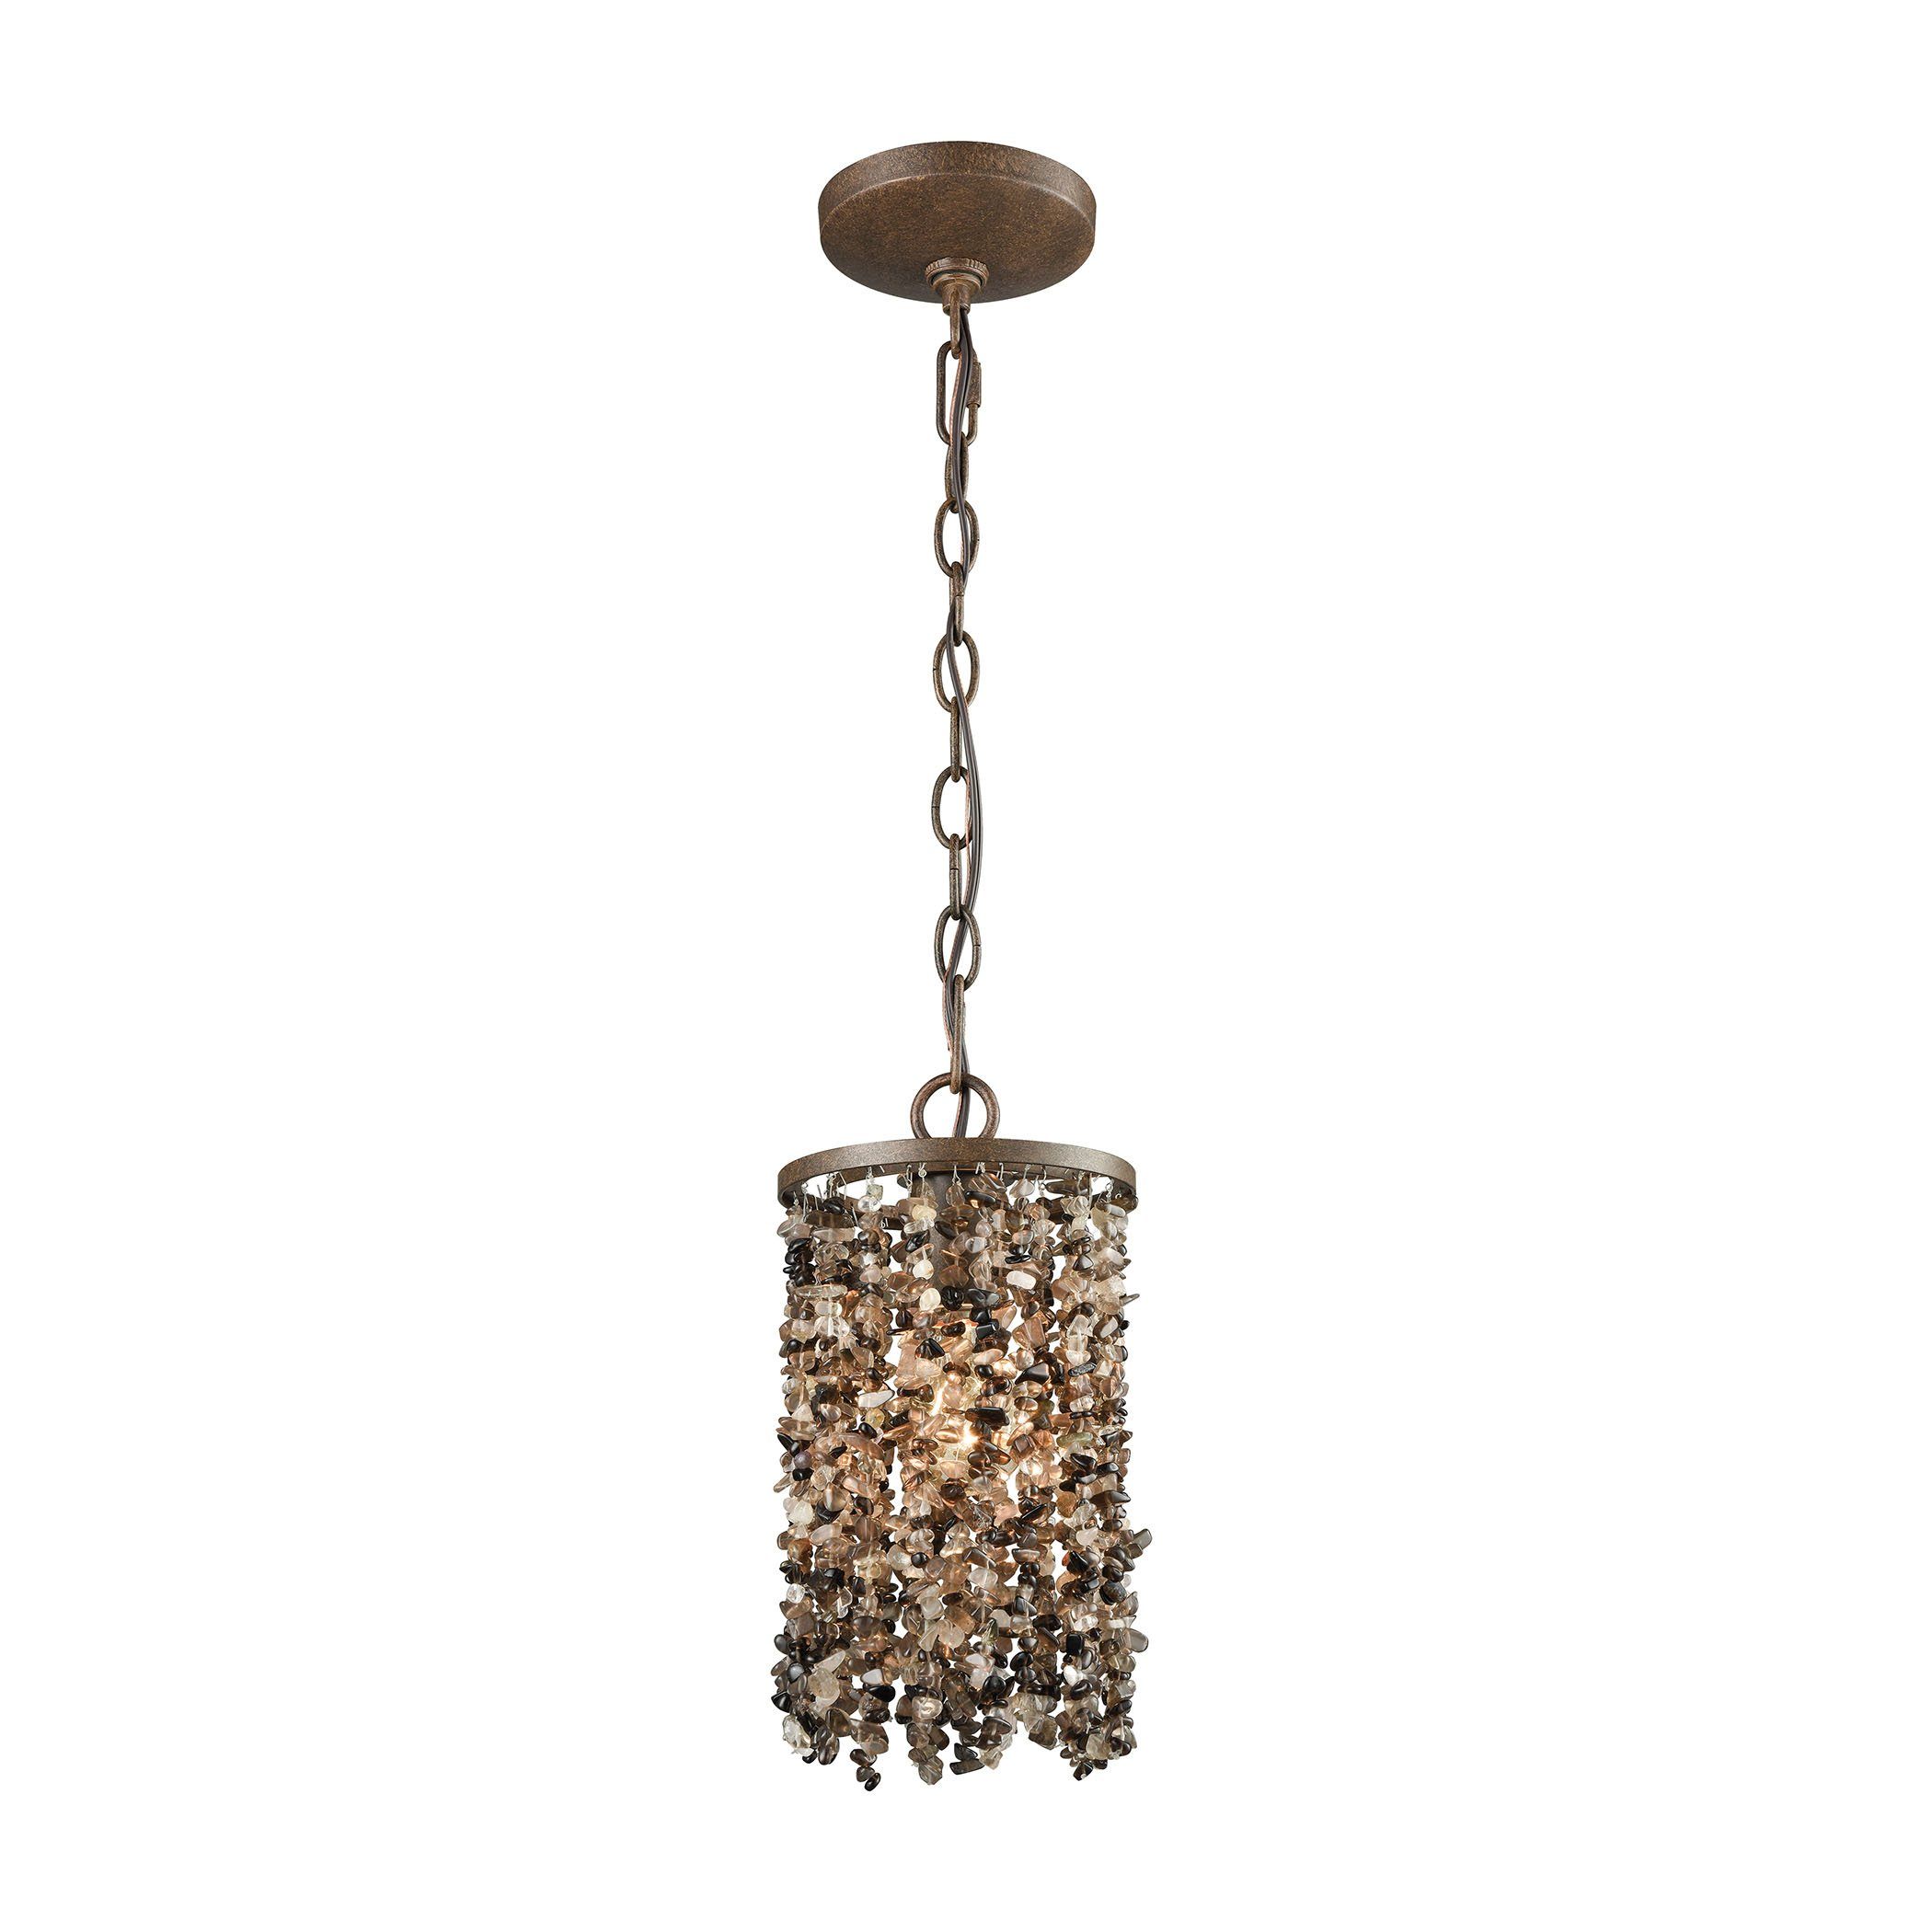 Agate Stones 1 Light Pendant in Weathered Bronze with Dark Bronze Agate Stones - Includes Recessed L Ceiling Elk Lighting 